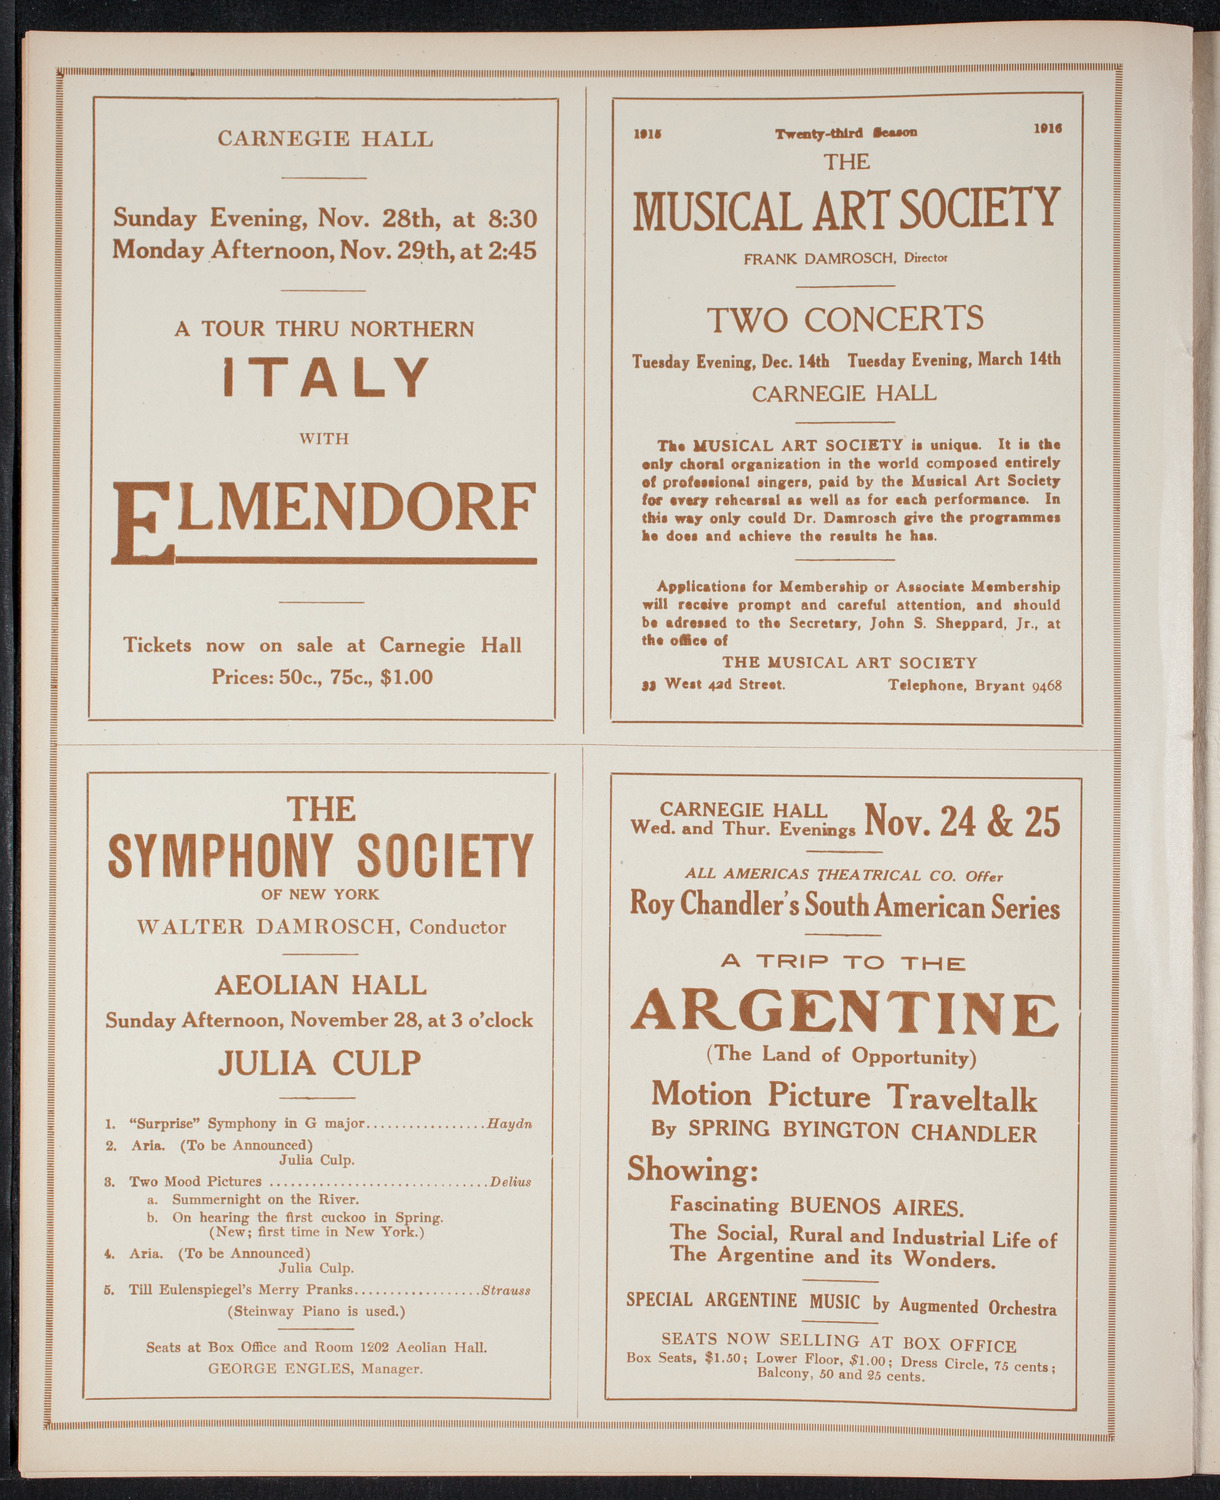 Roy Chandler's South American Series: Spring Byington-Chandler "A Trip to the Argentine", November 24, 1915, program page 8